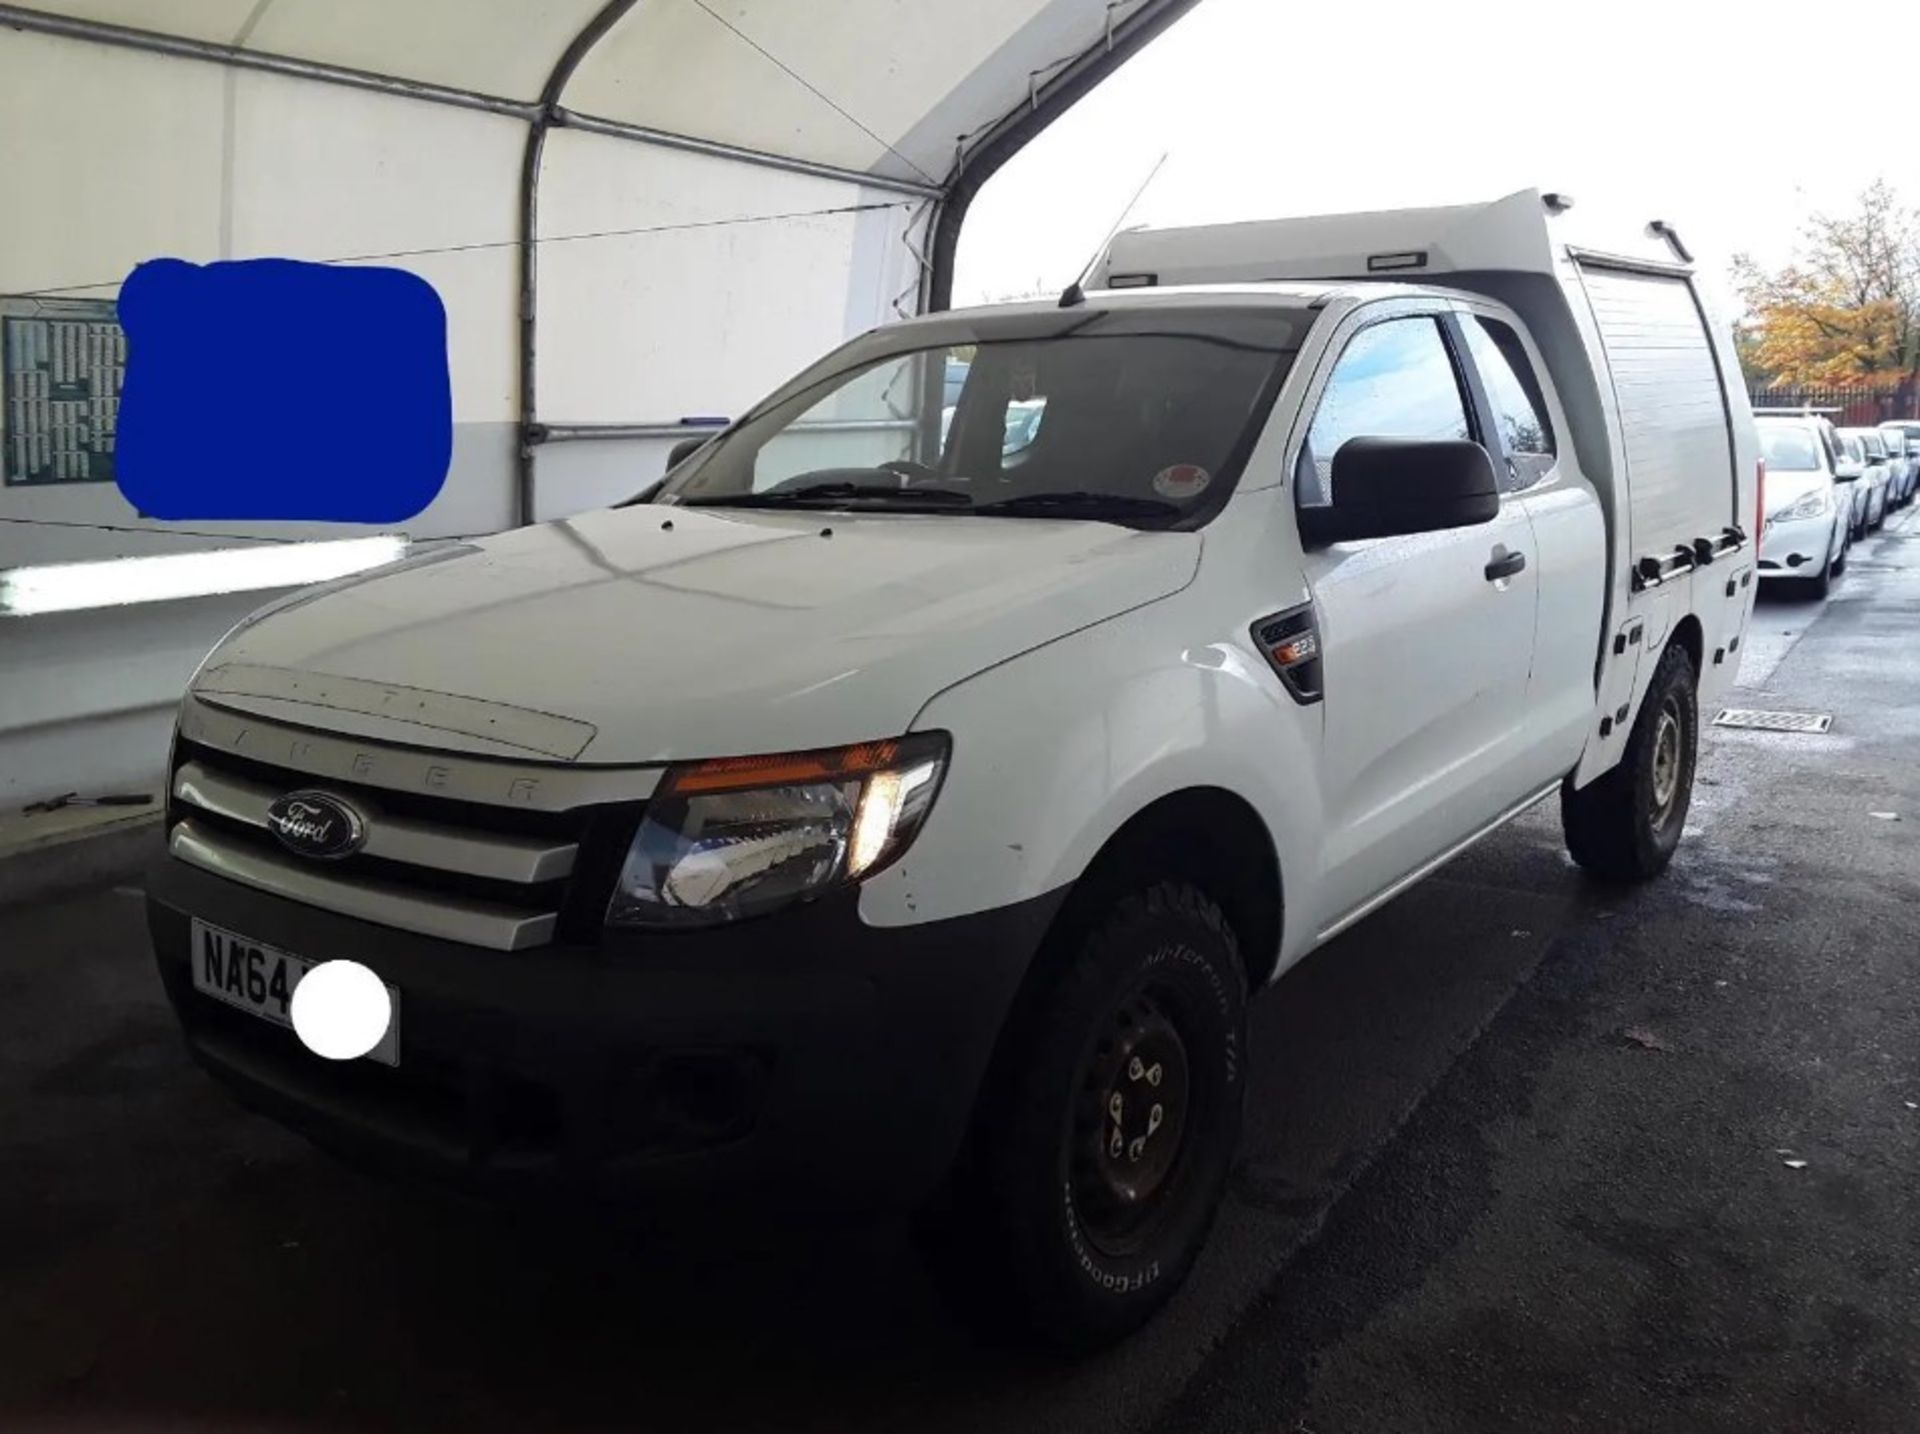 ROBUST 2014 FORD RANGER XL SUPER CAB - PERFECT FOR TOUGH JOBS (SPARES OR REPAIRS) - Image 2 of 12